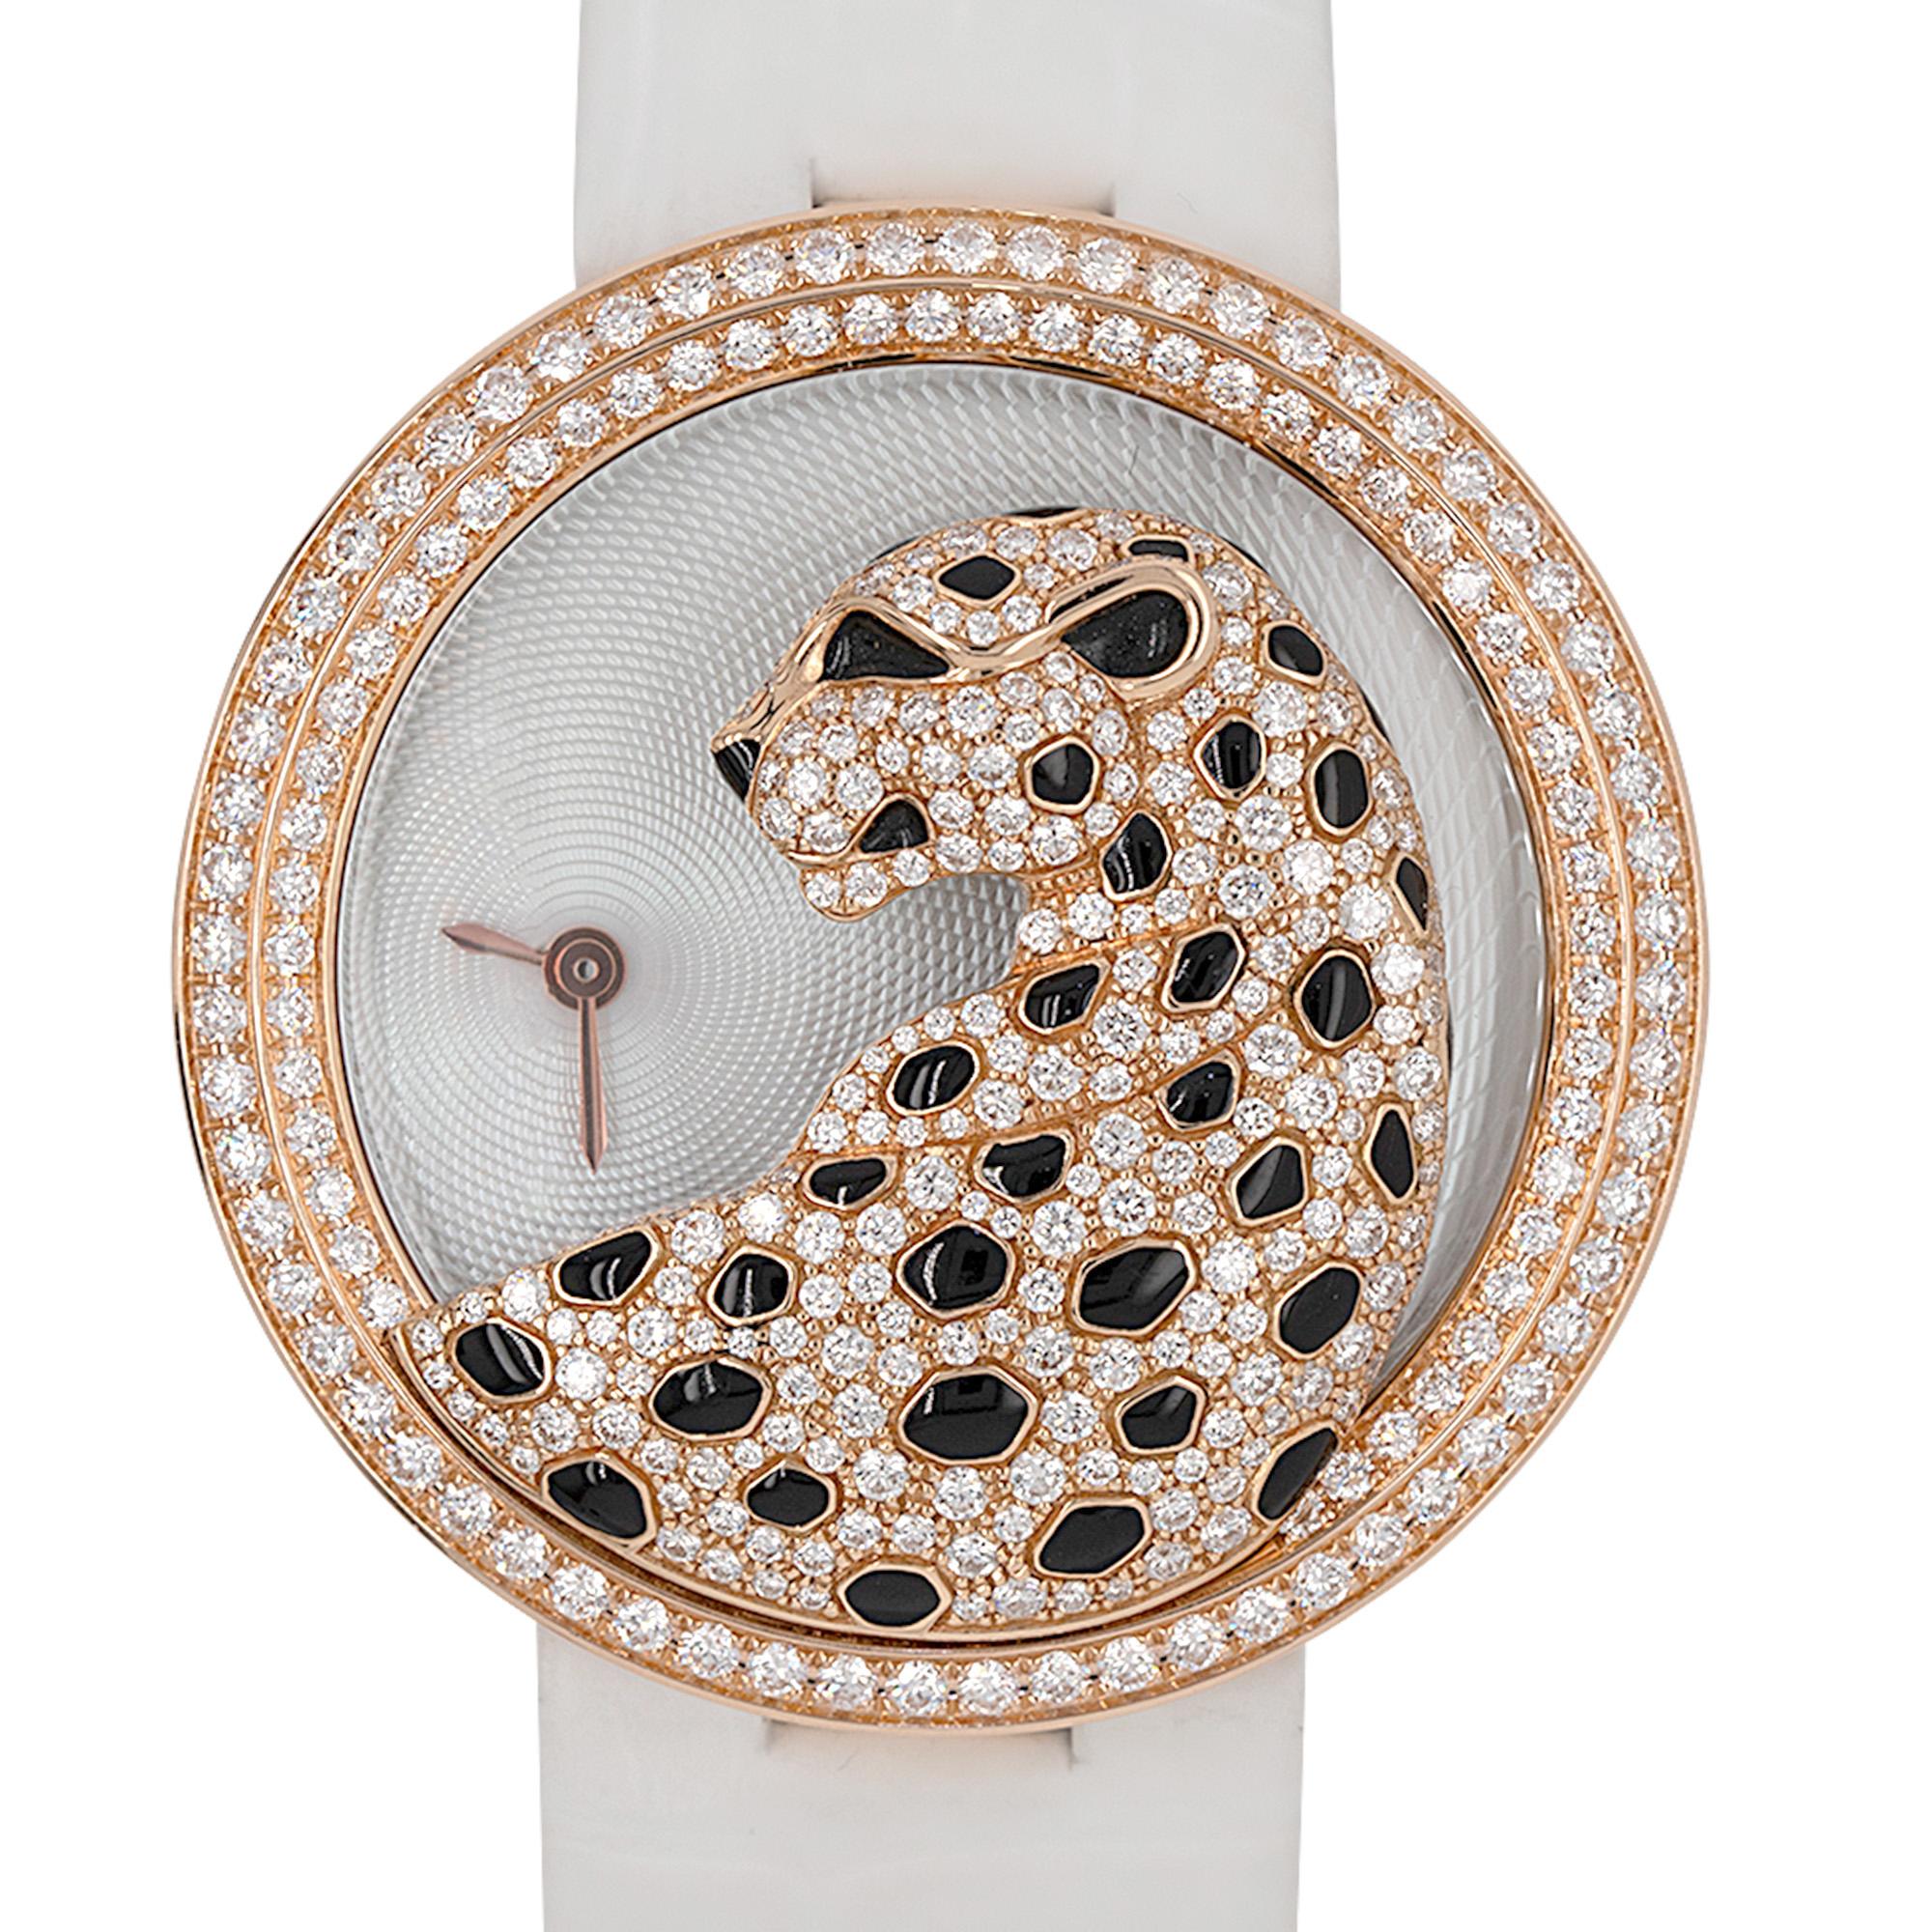 Cartier HPI00762 Panthere Divine Rose Gold Diamond Ladies Watch

Experience the mesmerizing beauty of the Cartier Panthere Divine watch, a true testament to elegance and grace. Crafted with precision, this exquisite timepiece features an 18k rose